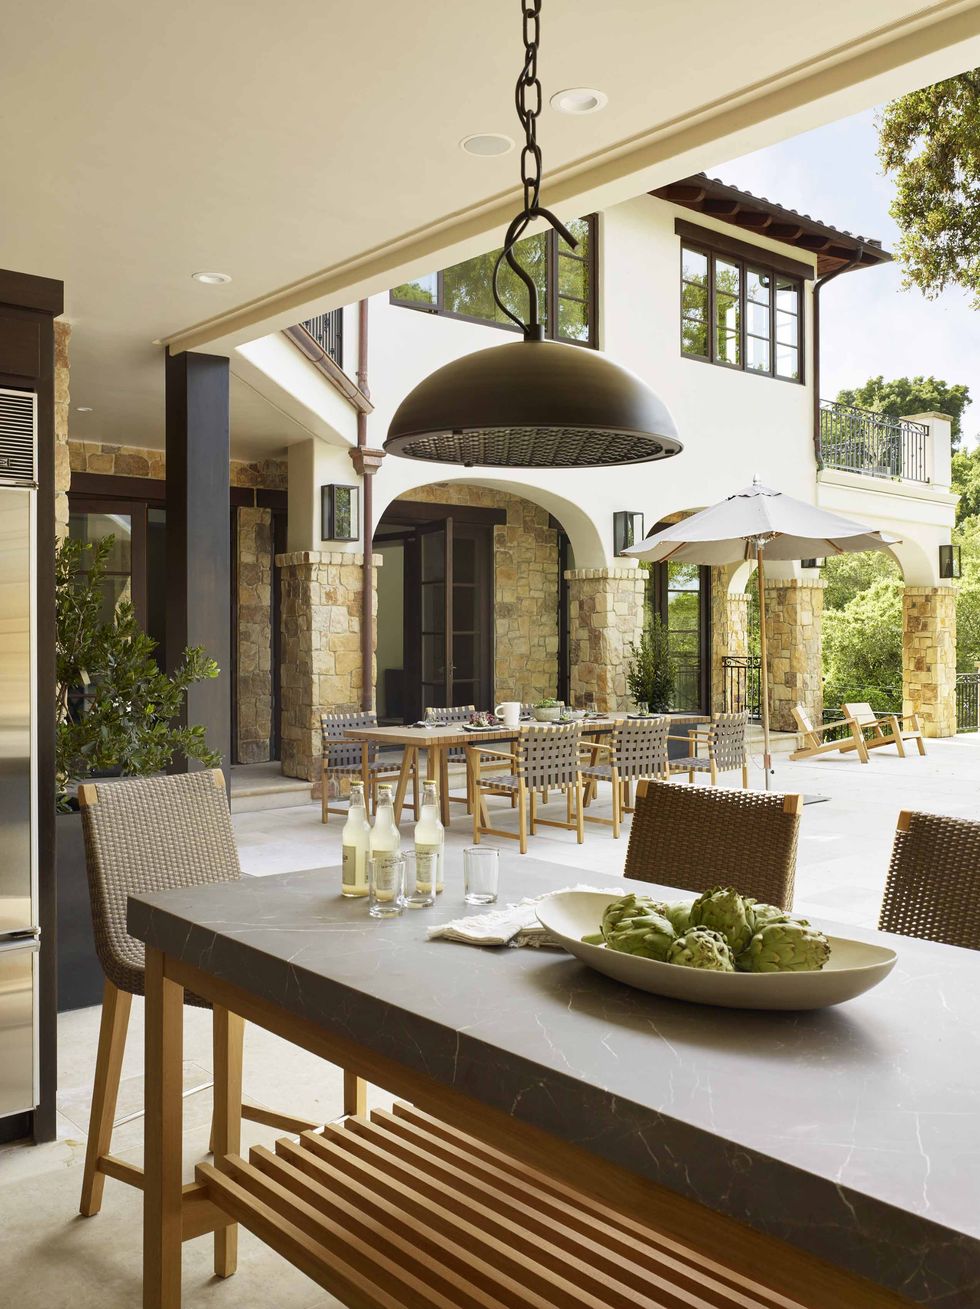 10 Modern Mediterranean Decorating Ideas You Need To Try Today ...